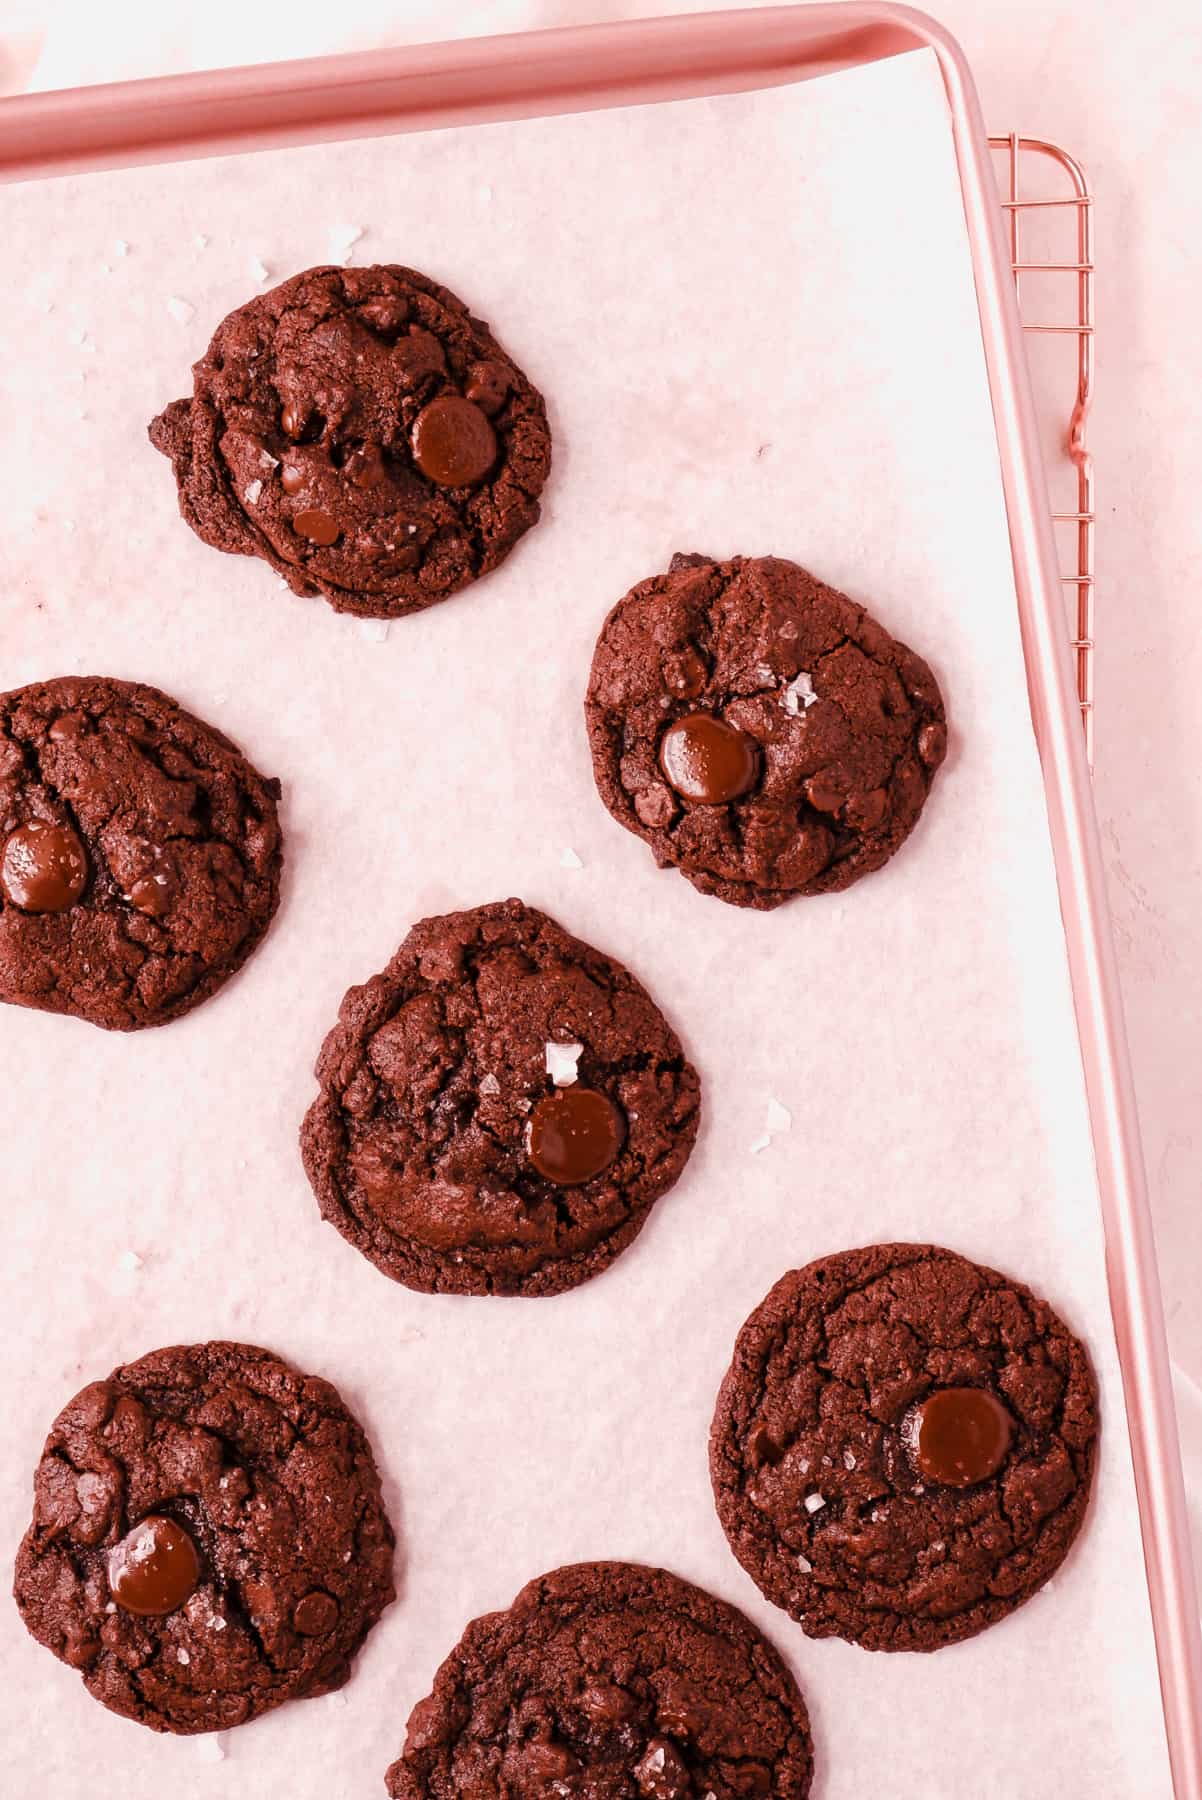 freshly baked dark chocolate chip cookies on a parchment lined pink baking tray.